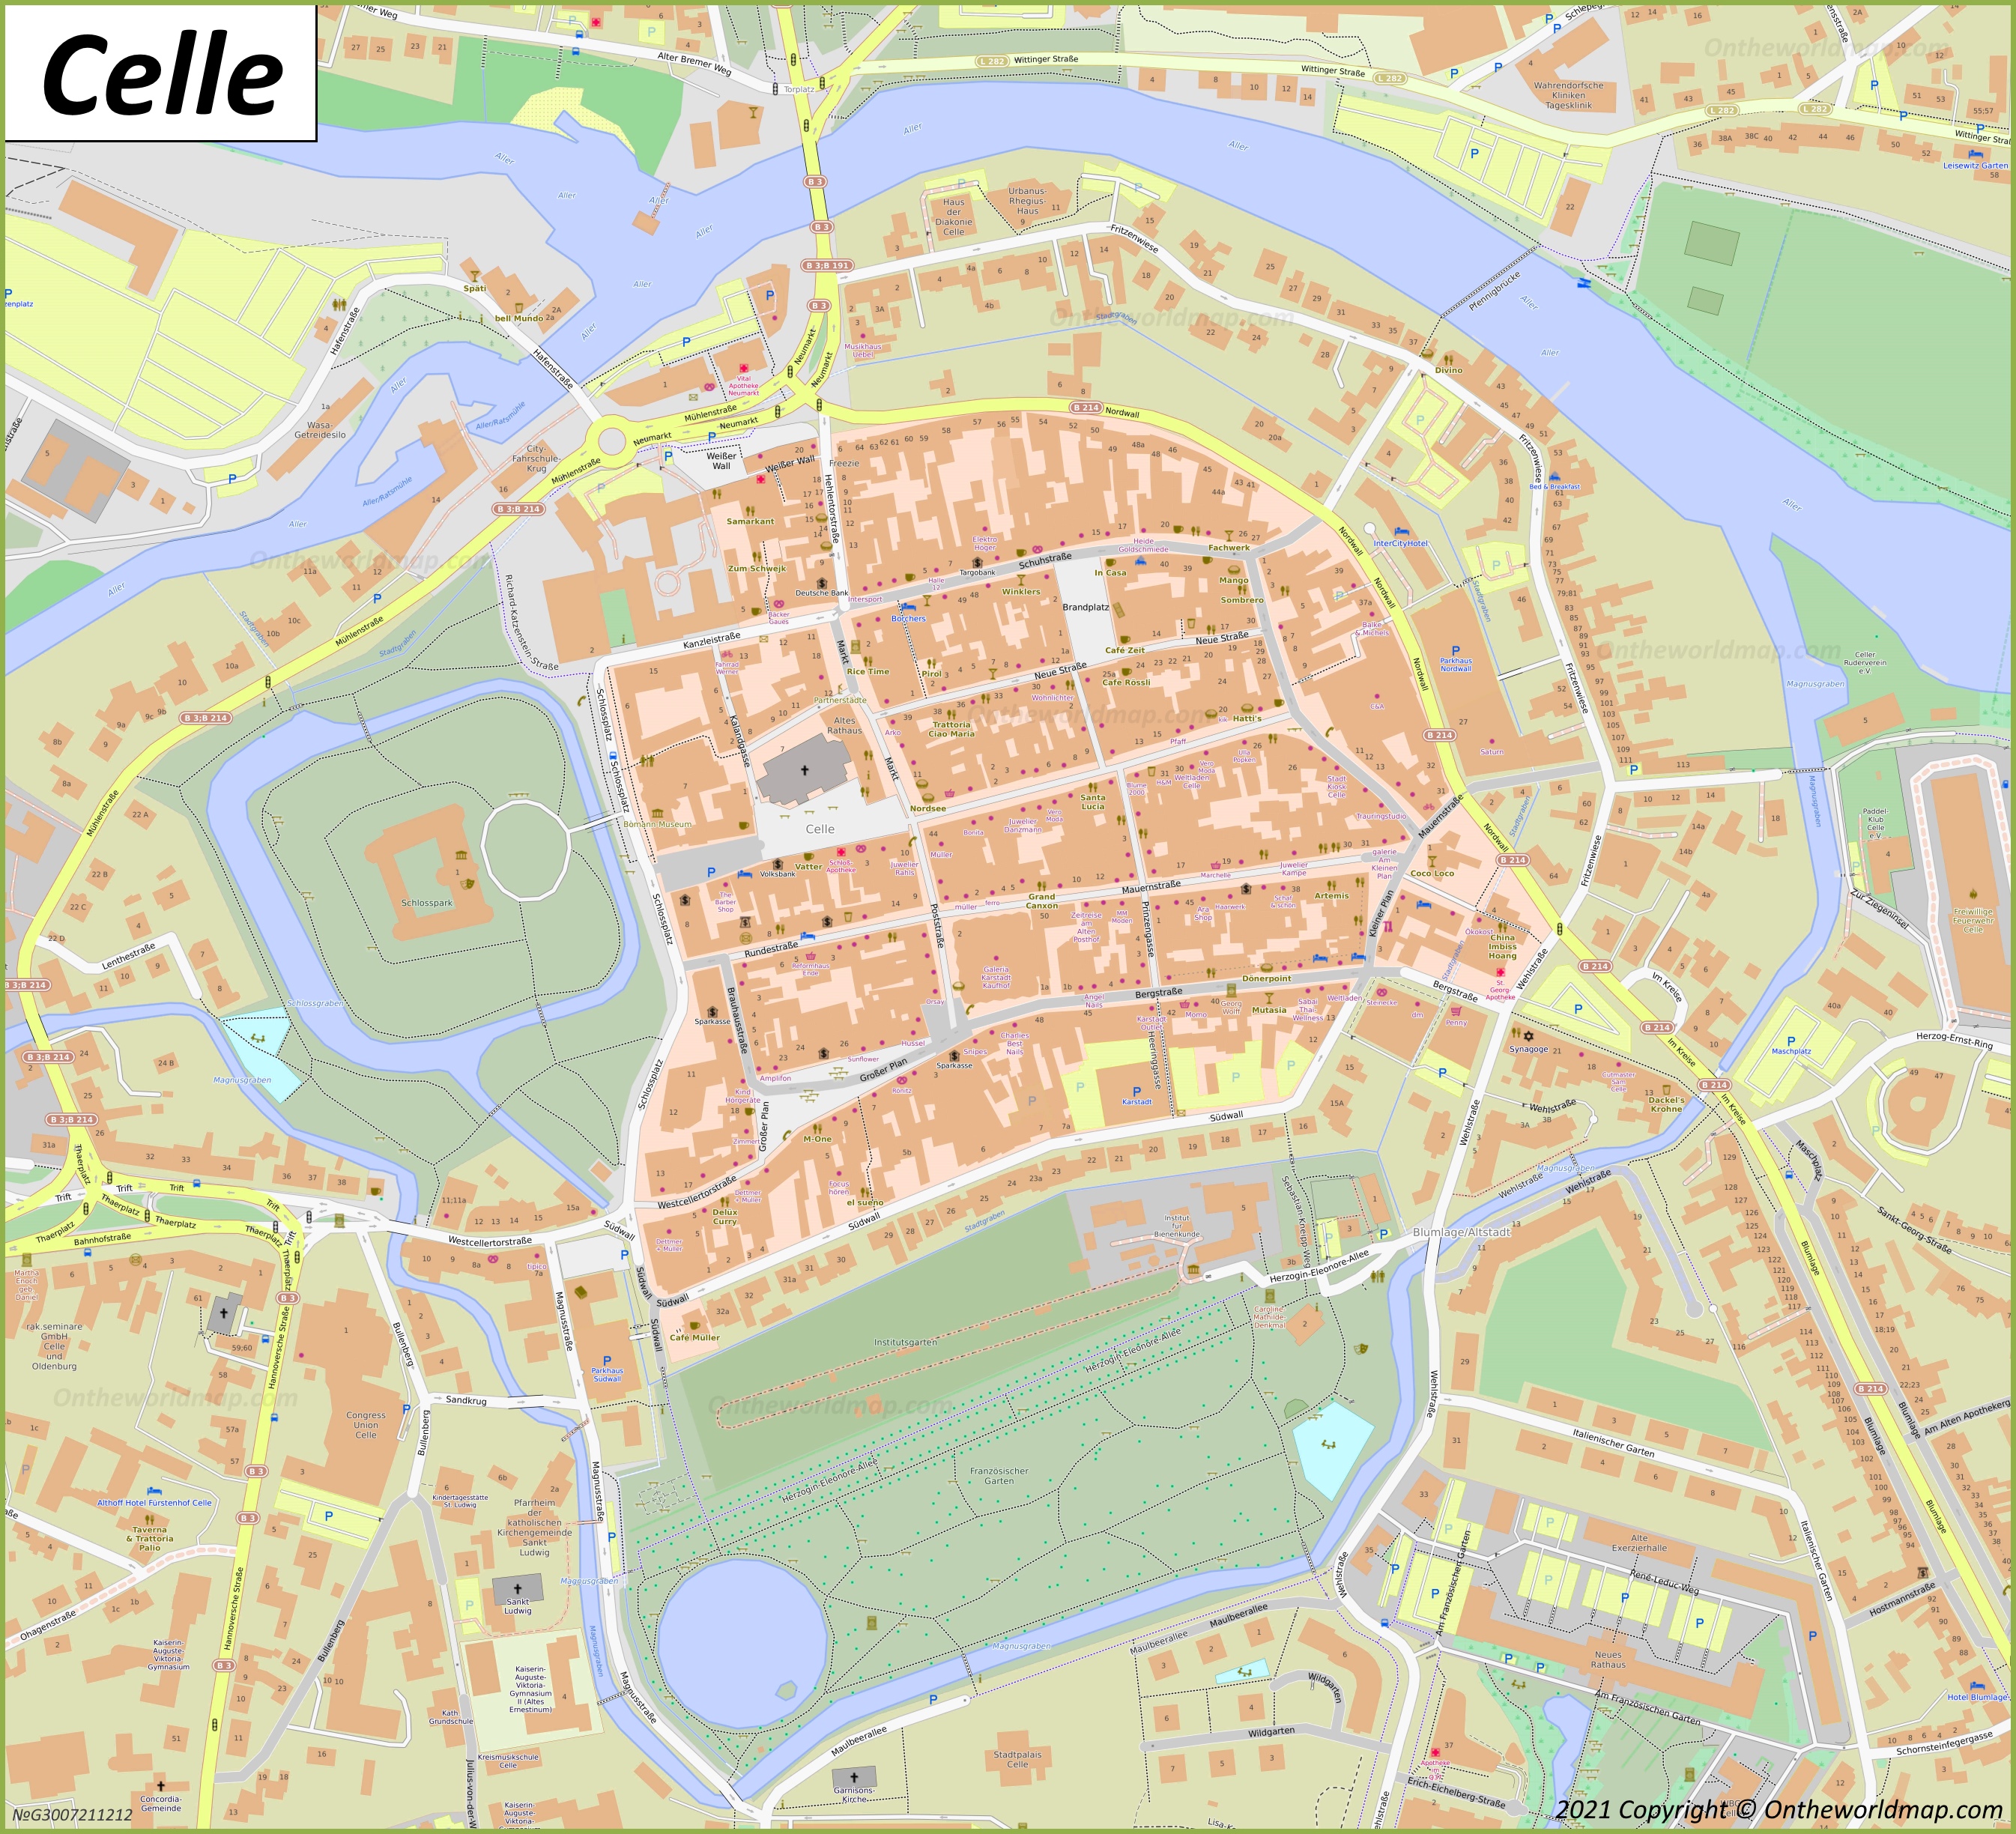 Celle Old Town Map